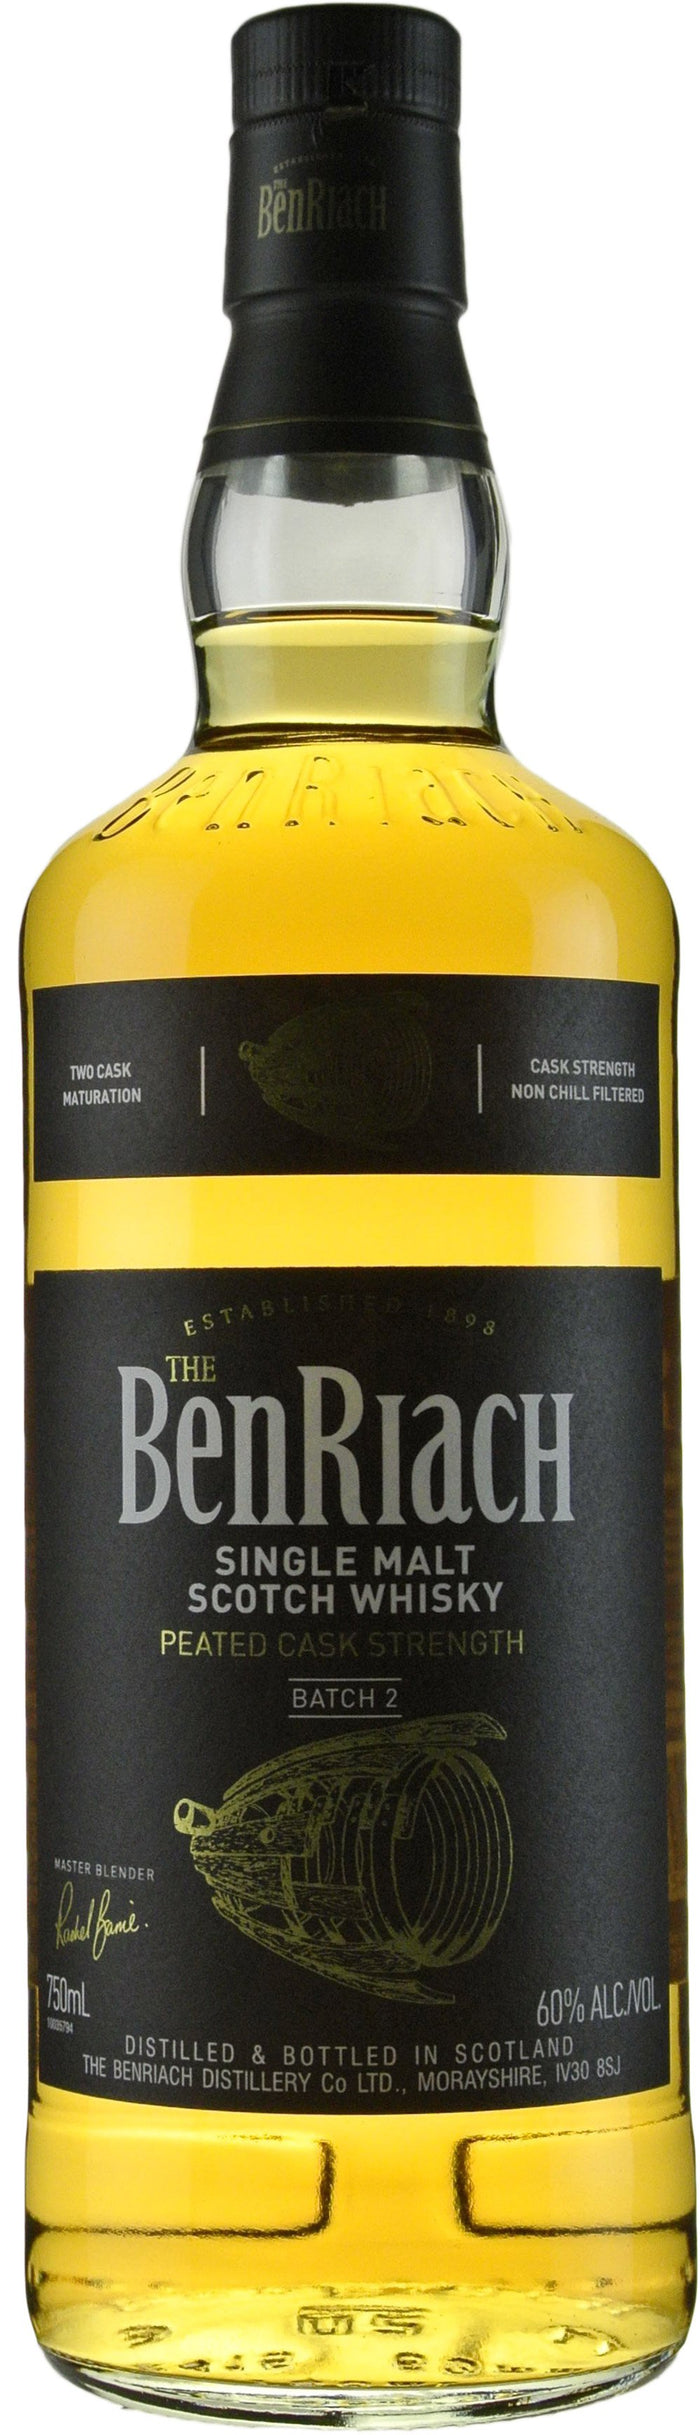 BenRiach Peated Cask Strength Batch 2 Whiskey